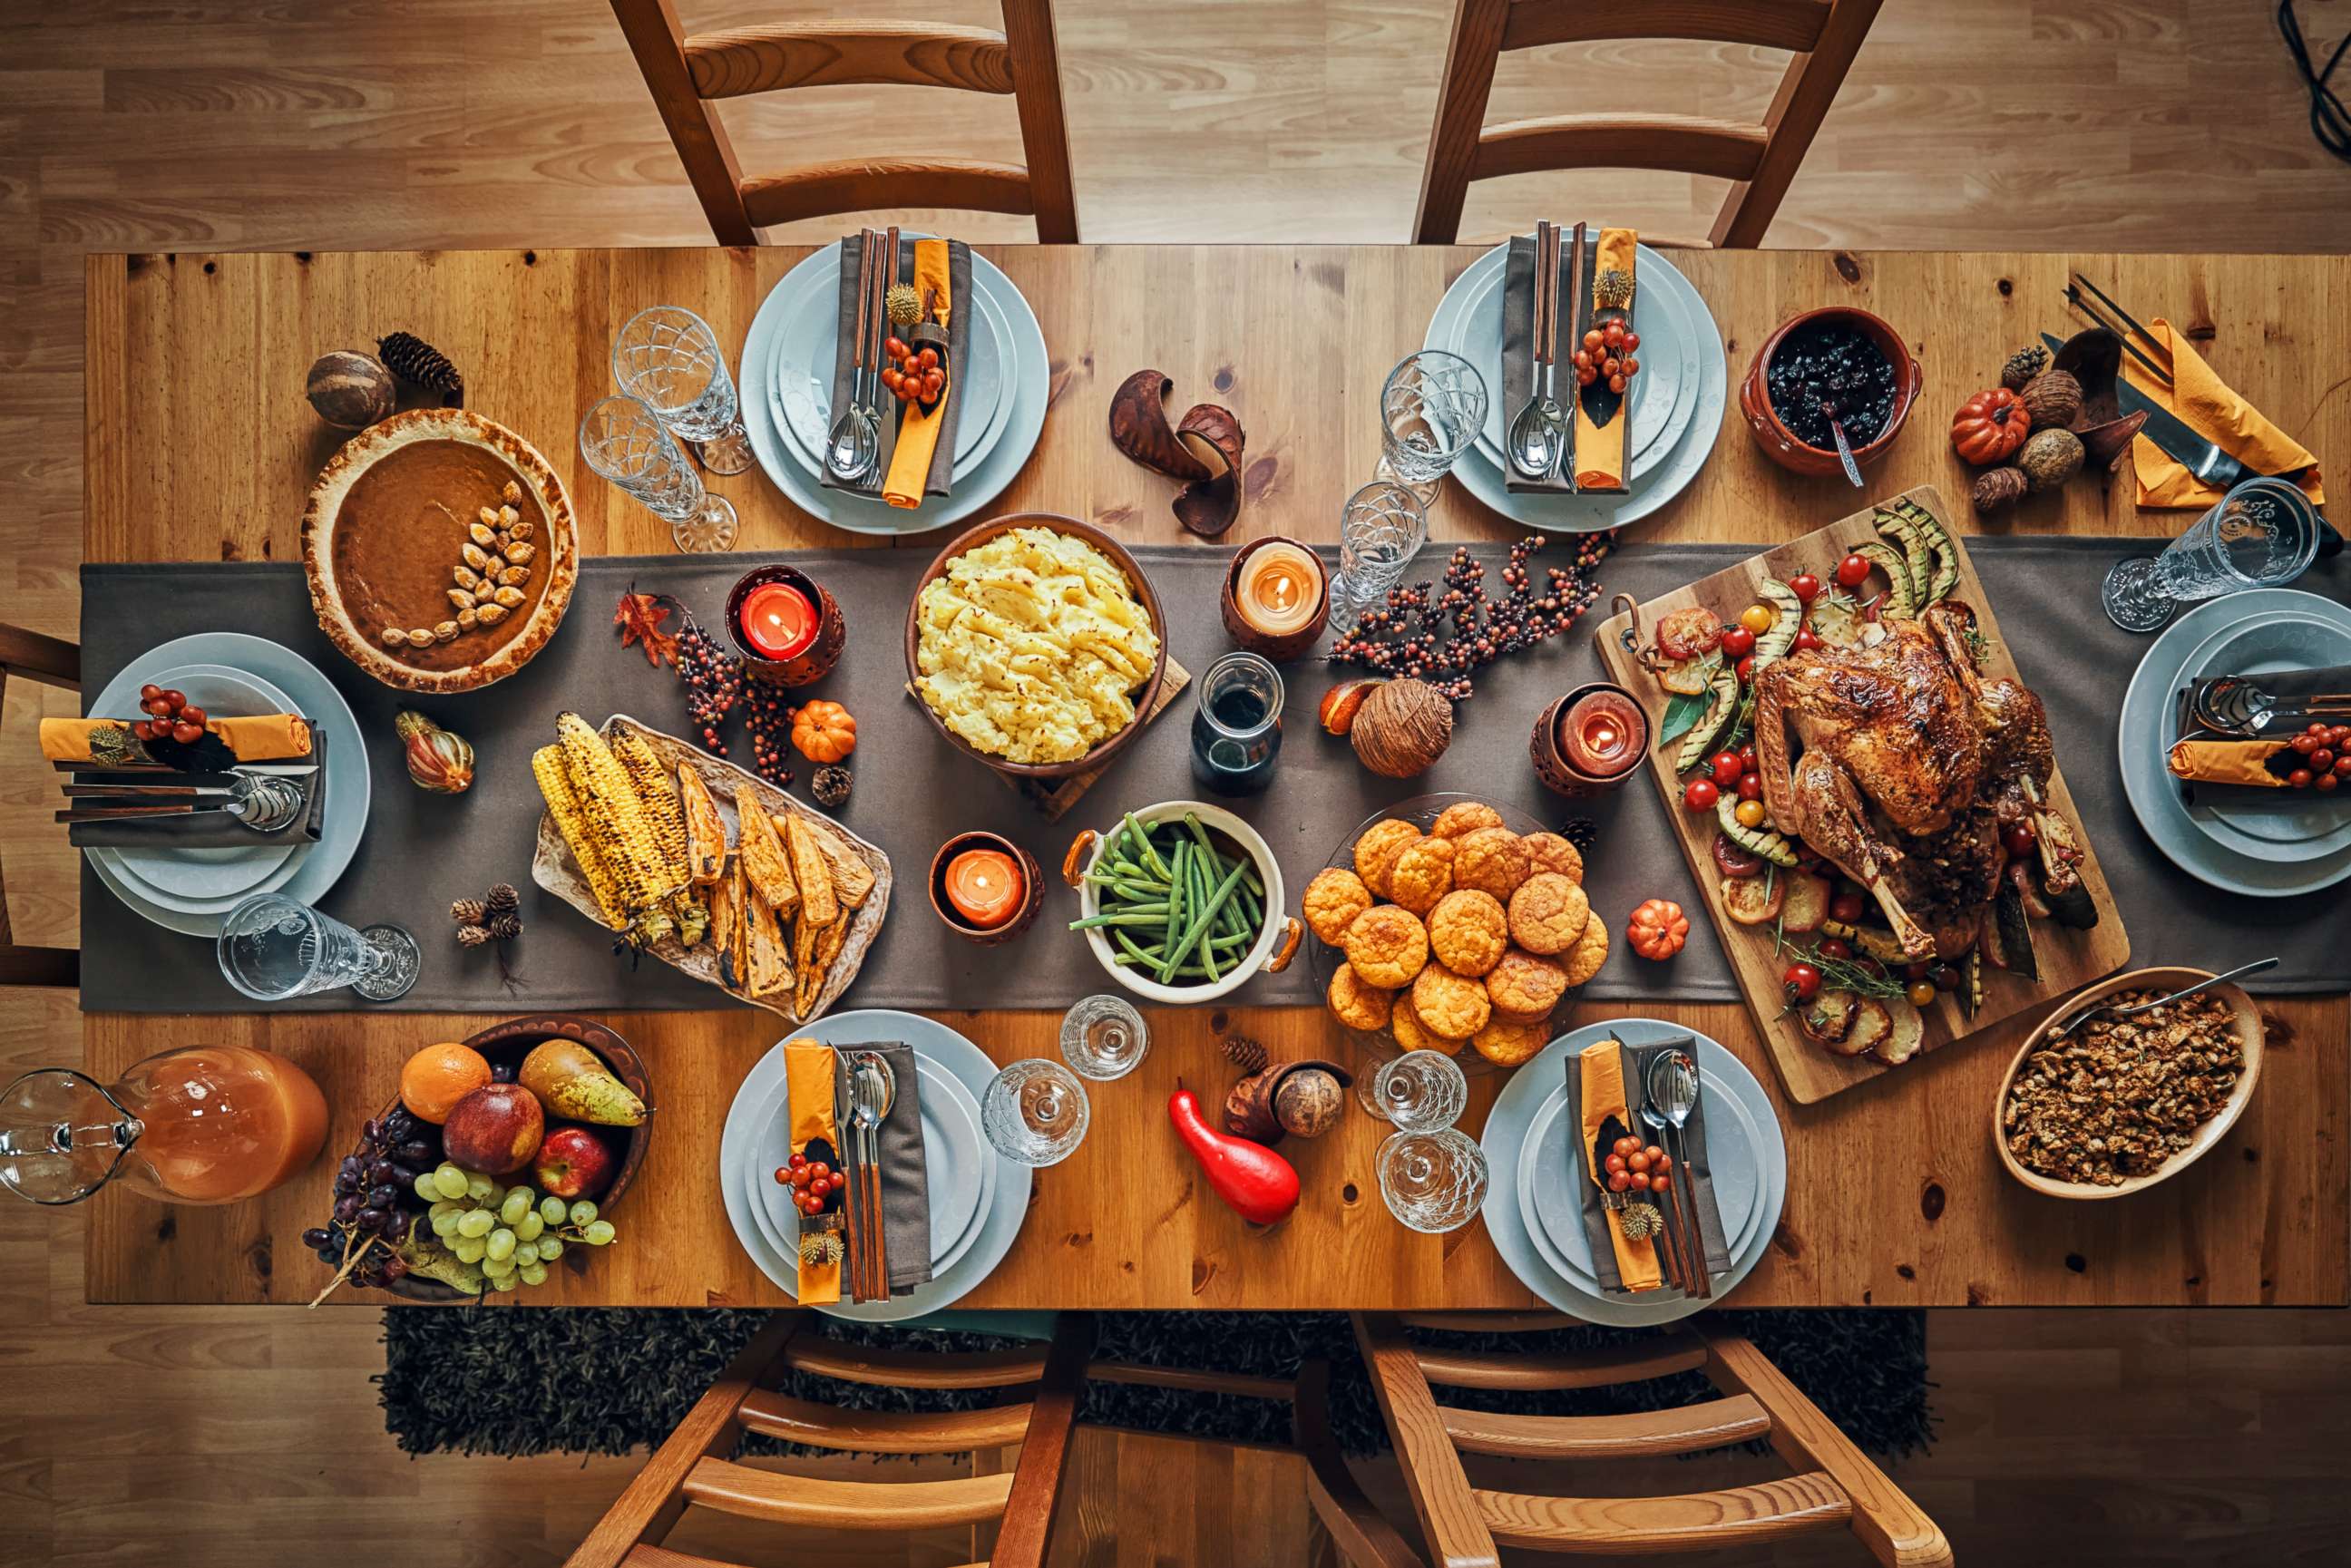 PHOTO: A traditional Thanksgiving table is seen in this stock photo.